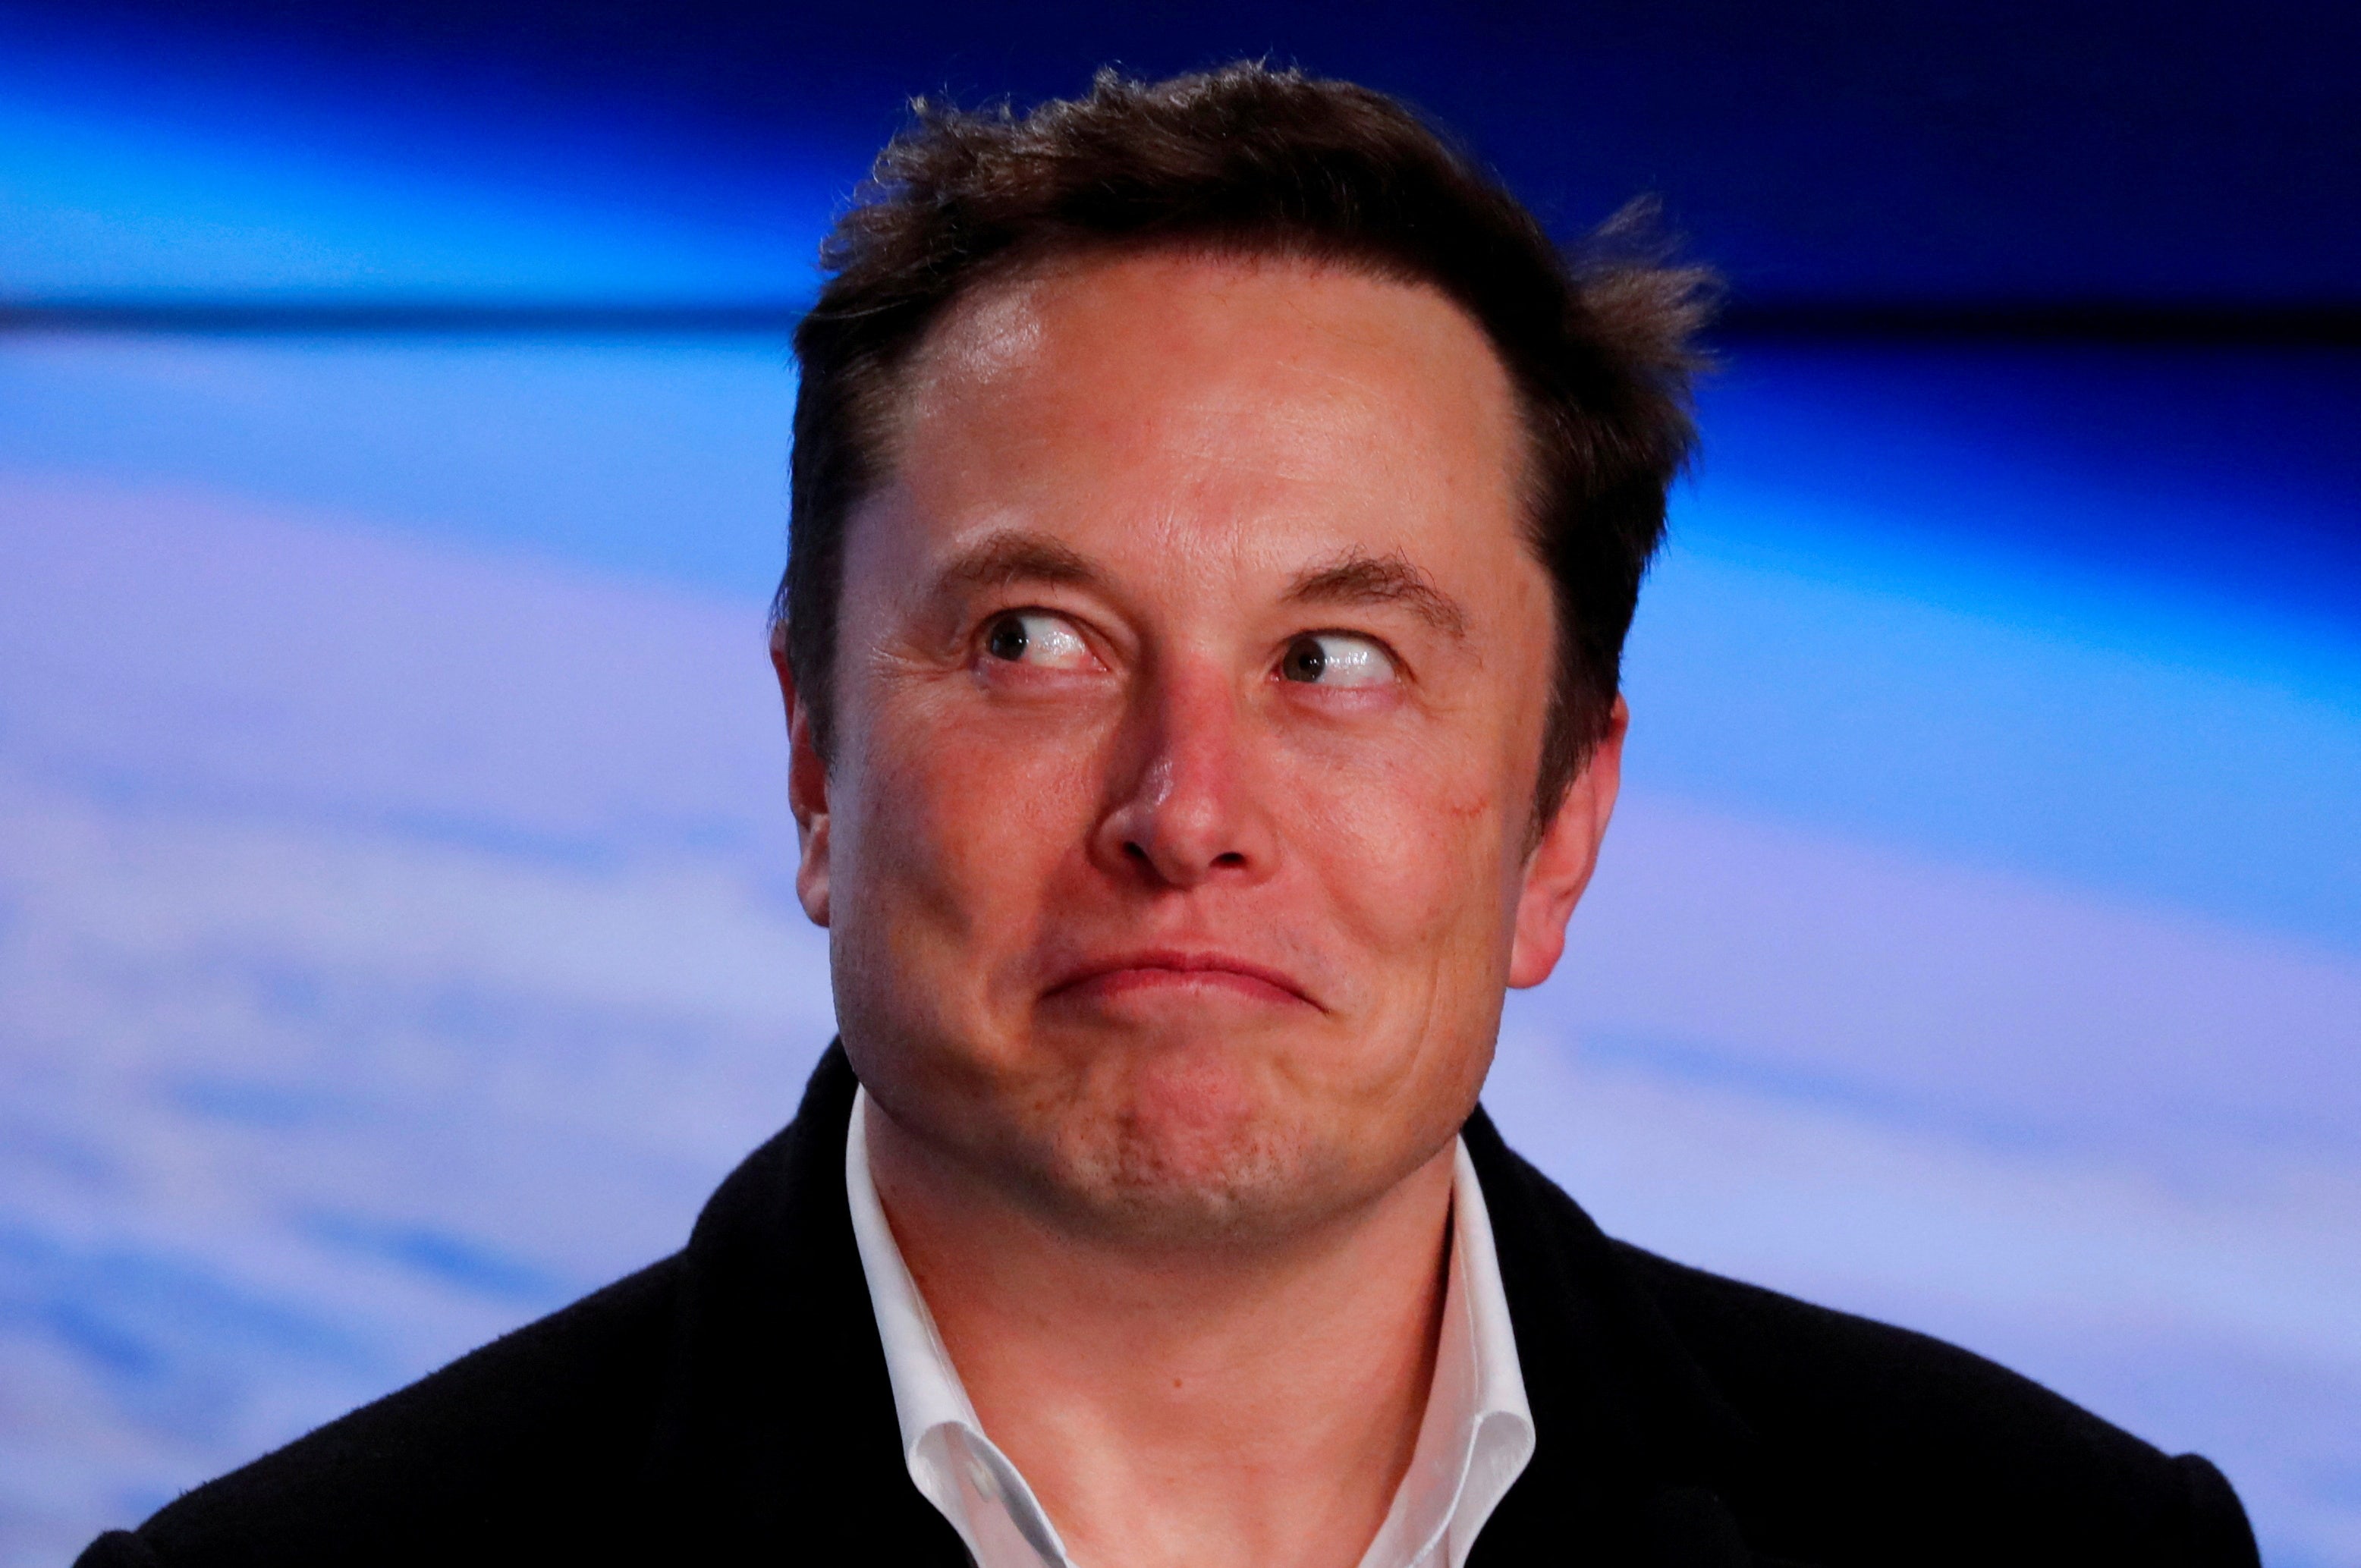 Liberal professor loses it over Elon Musk’s Twitter polls: For the next poll he can ‘shove it up his a–‘